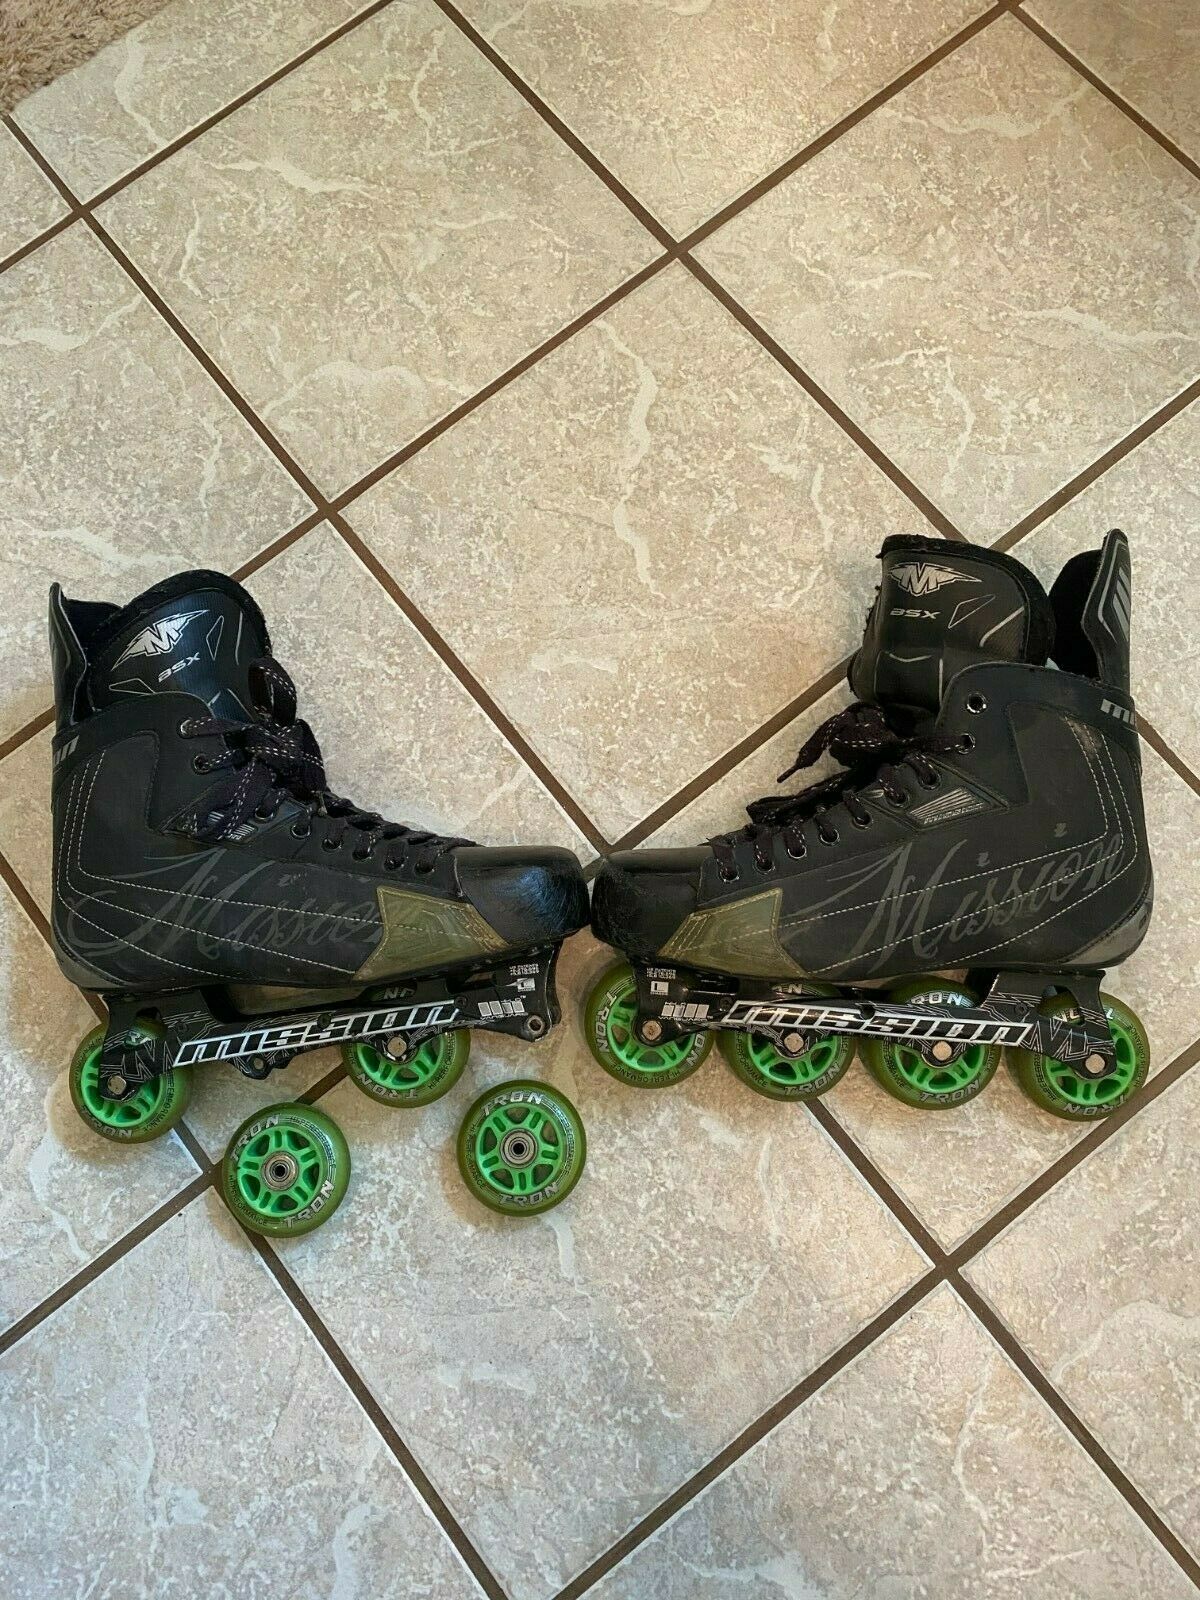 Mission BSX Roller Hockey Skates Black + Tron High Performance Wheels USED